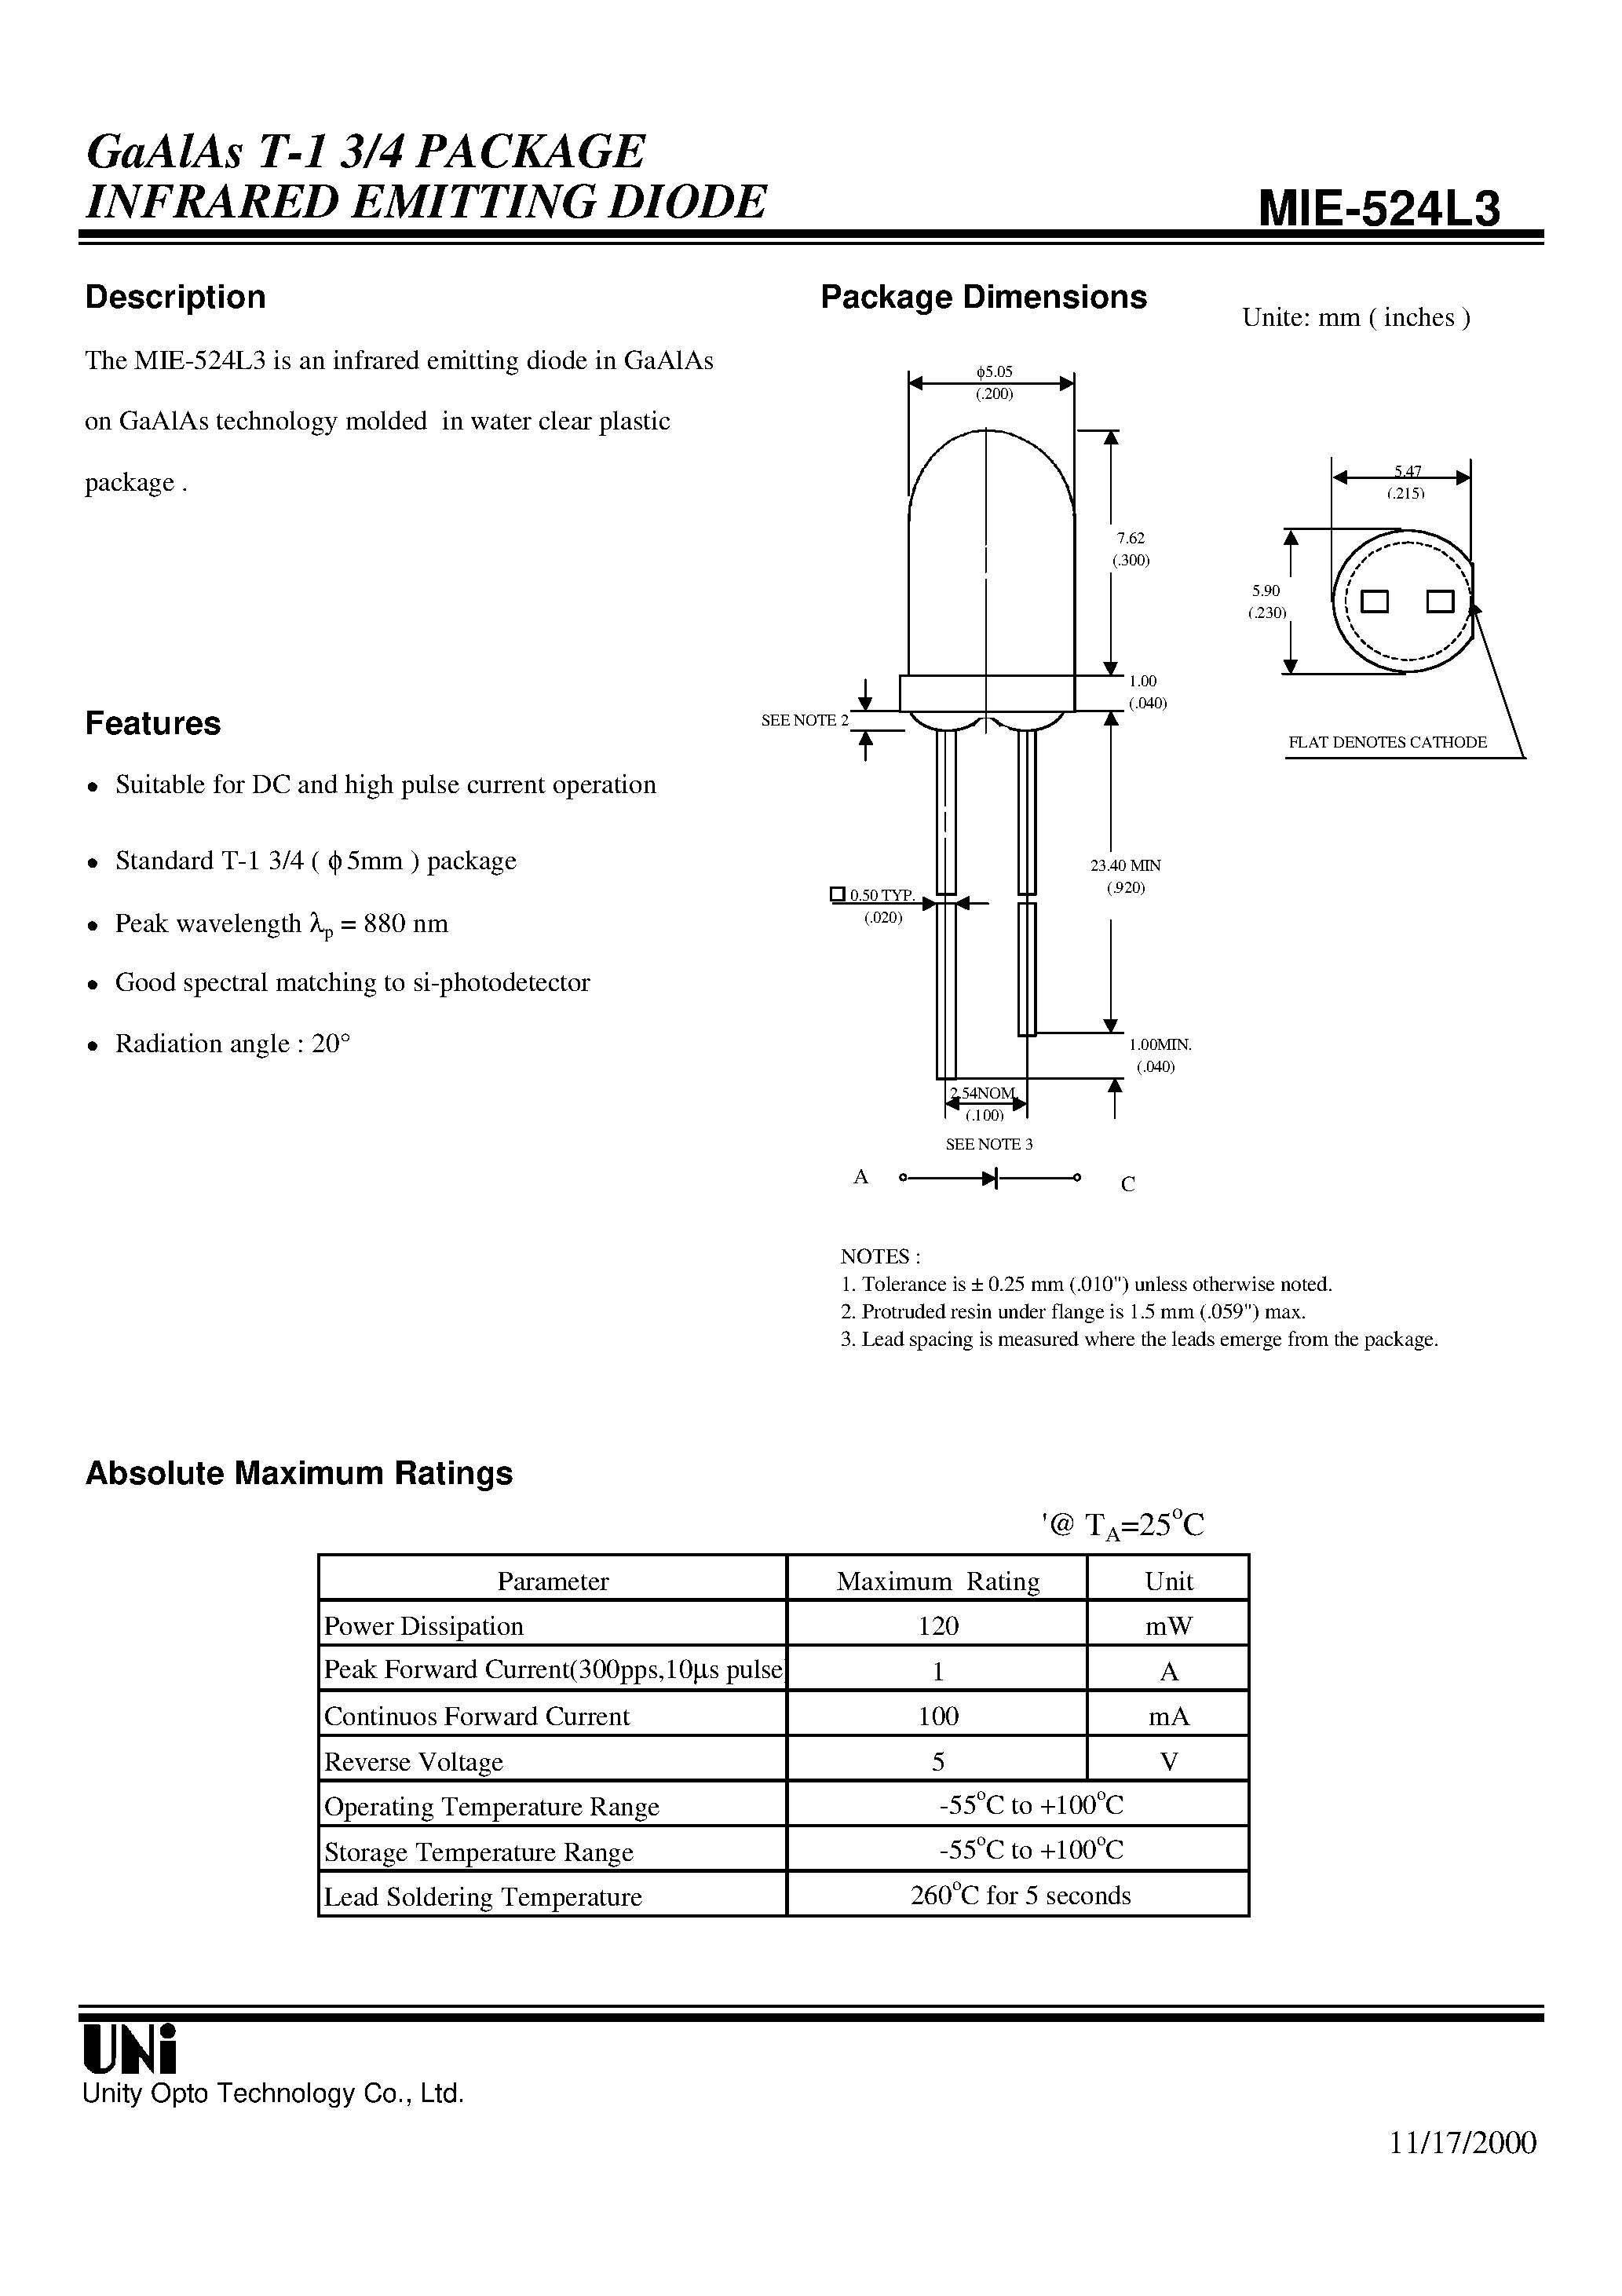 Datasheet MIE-524L3 - GaAlAs T-1 3/4 PACKAGE INFRARED EMITTING DIODE page 1